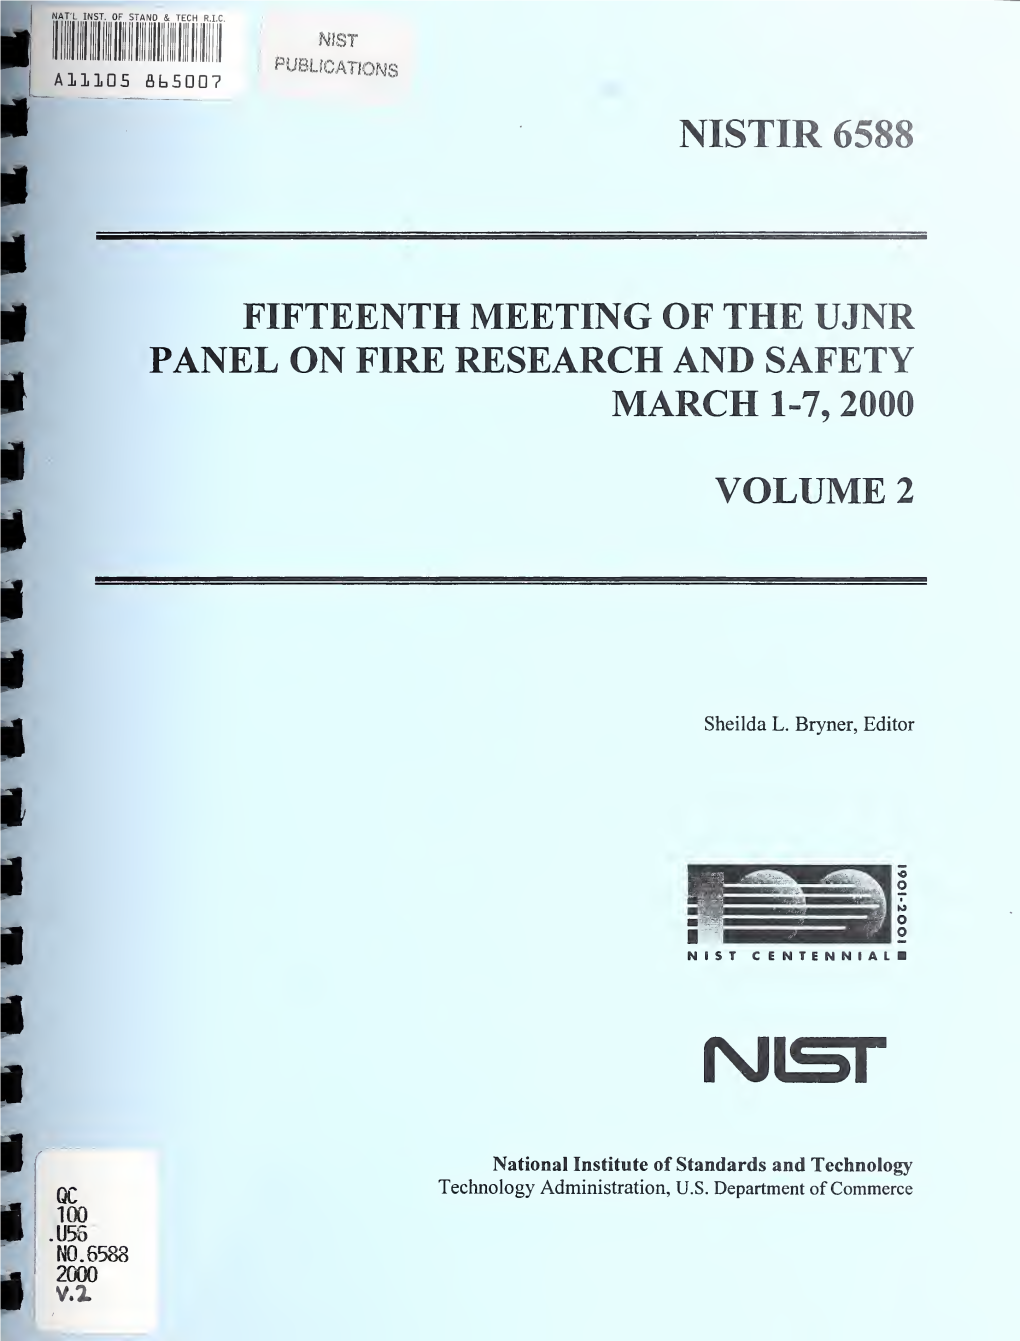 Fifteenth Meeting of the UJNR Panel on Fire Research and Safety, March 1